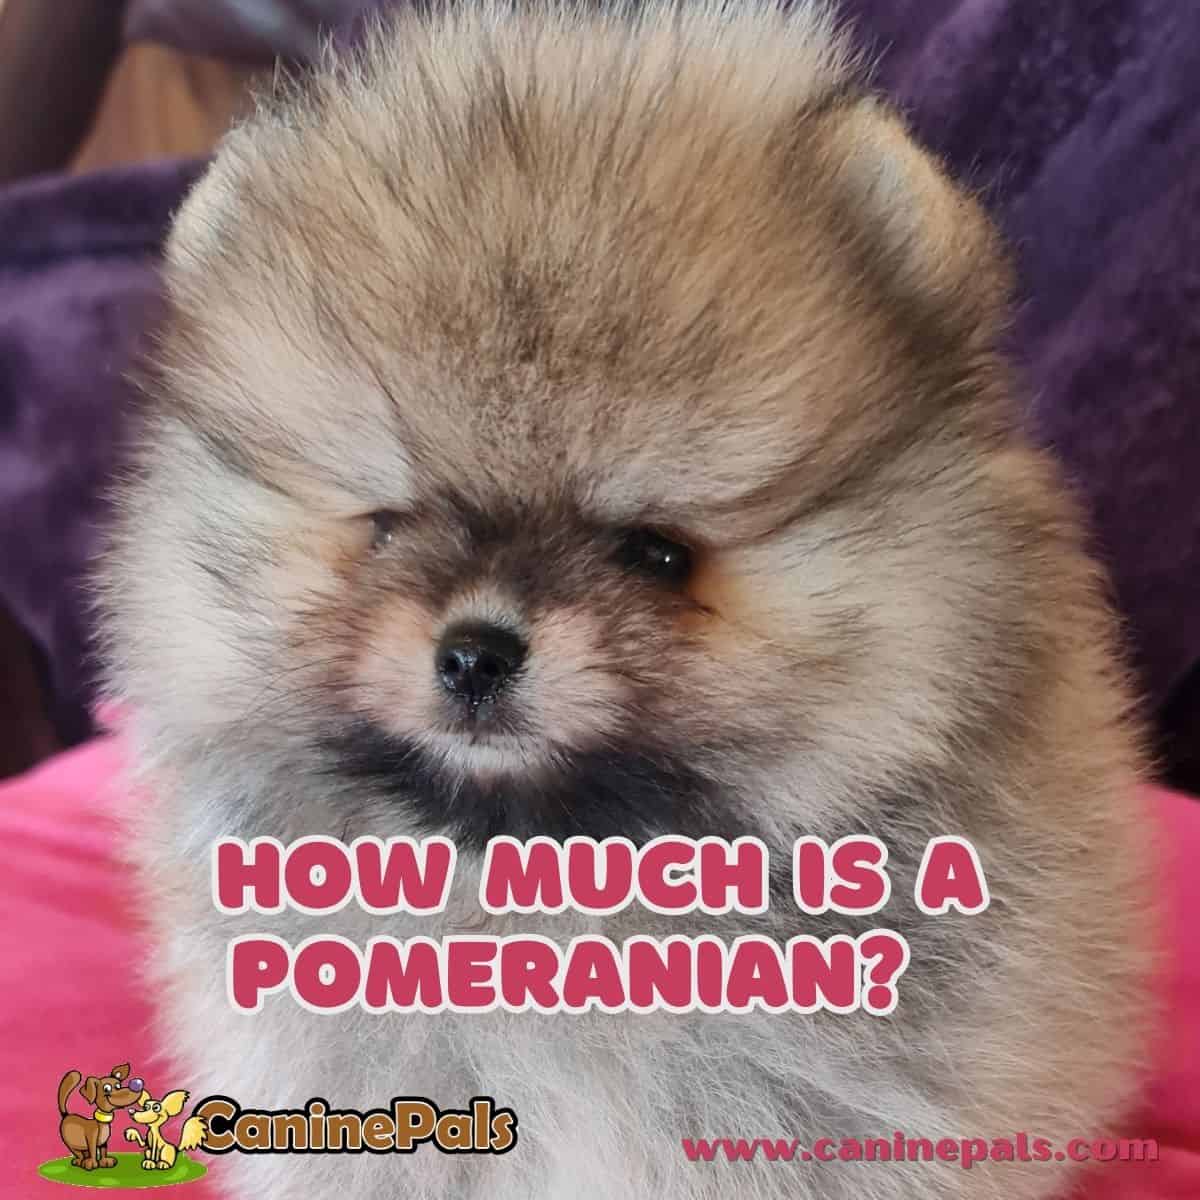 How Much is a Pomeranian?